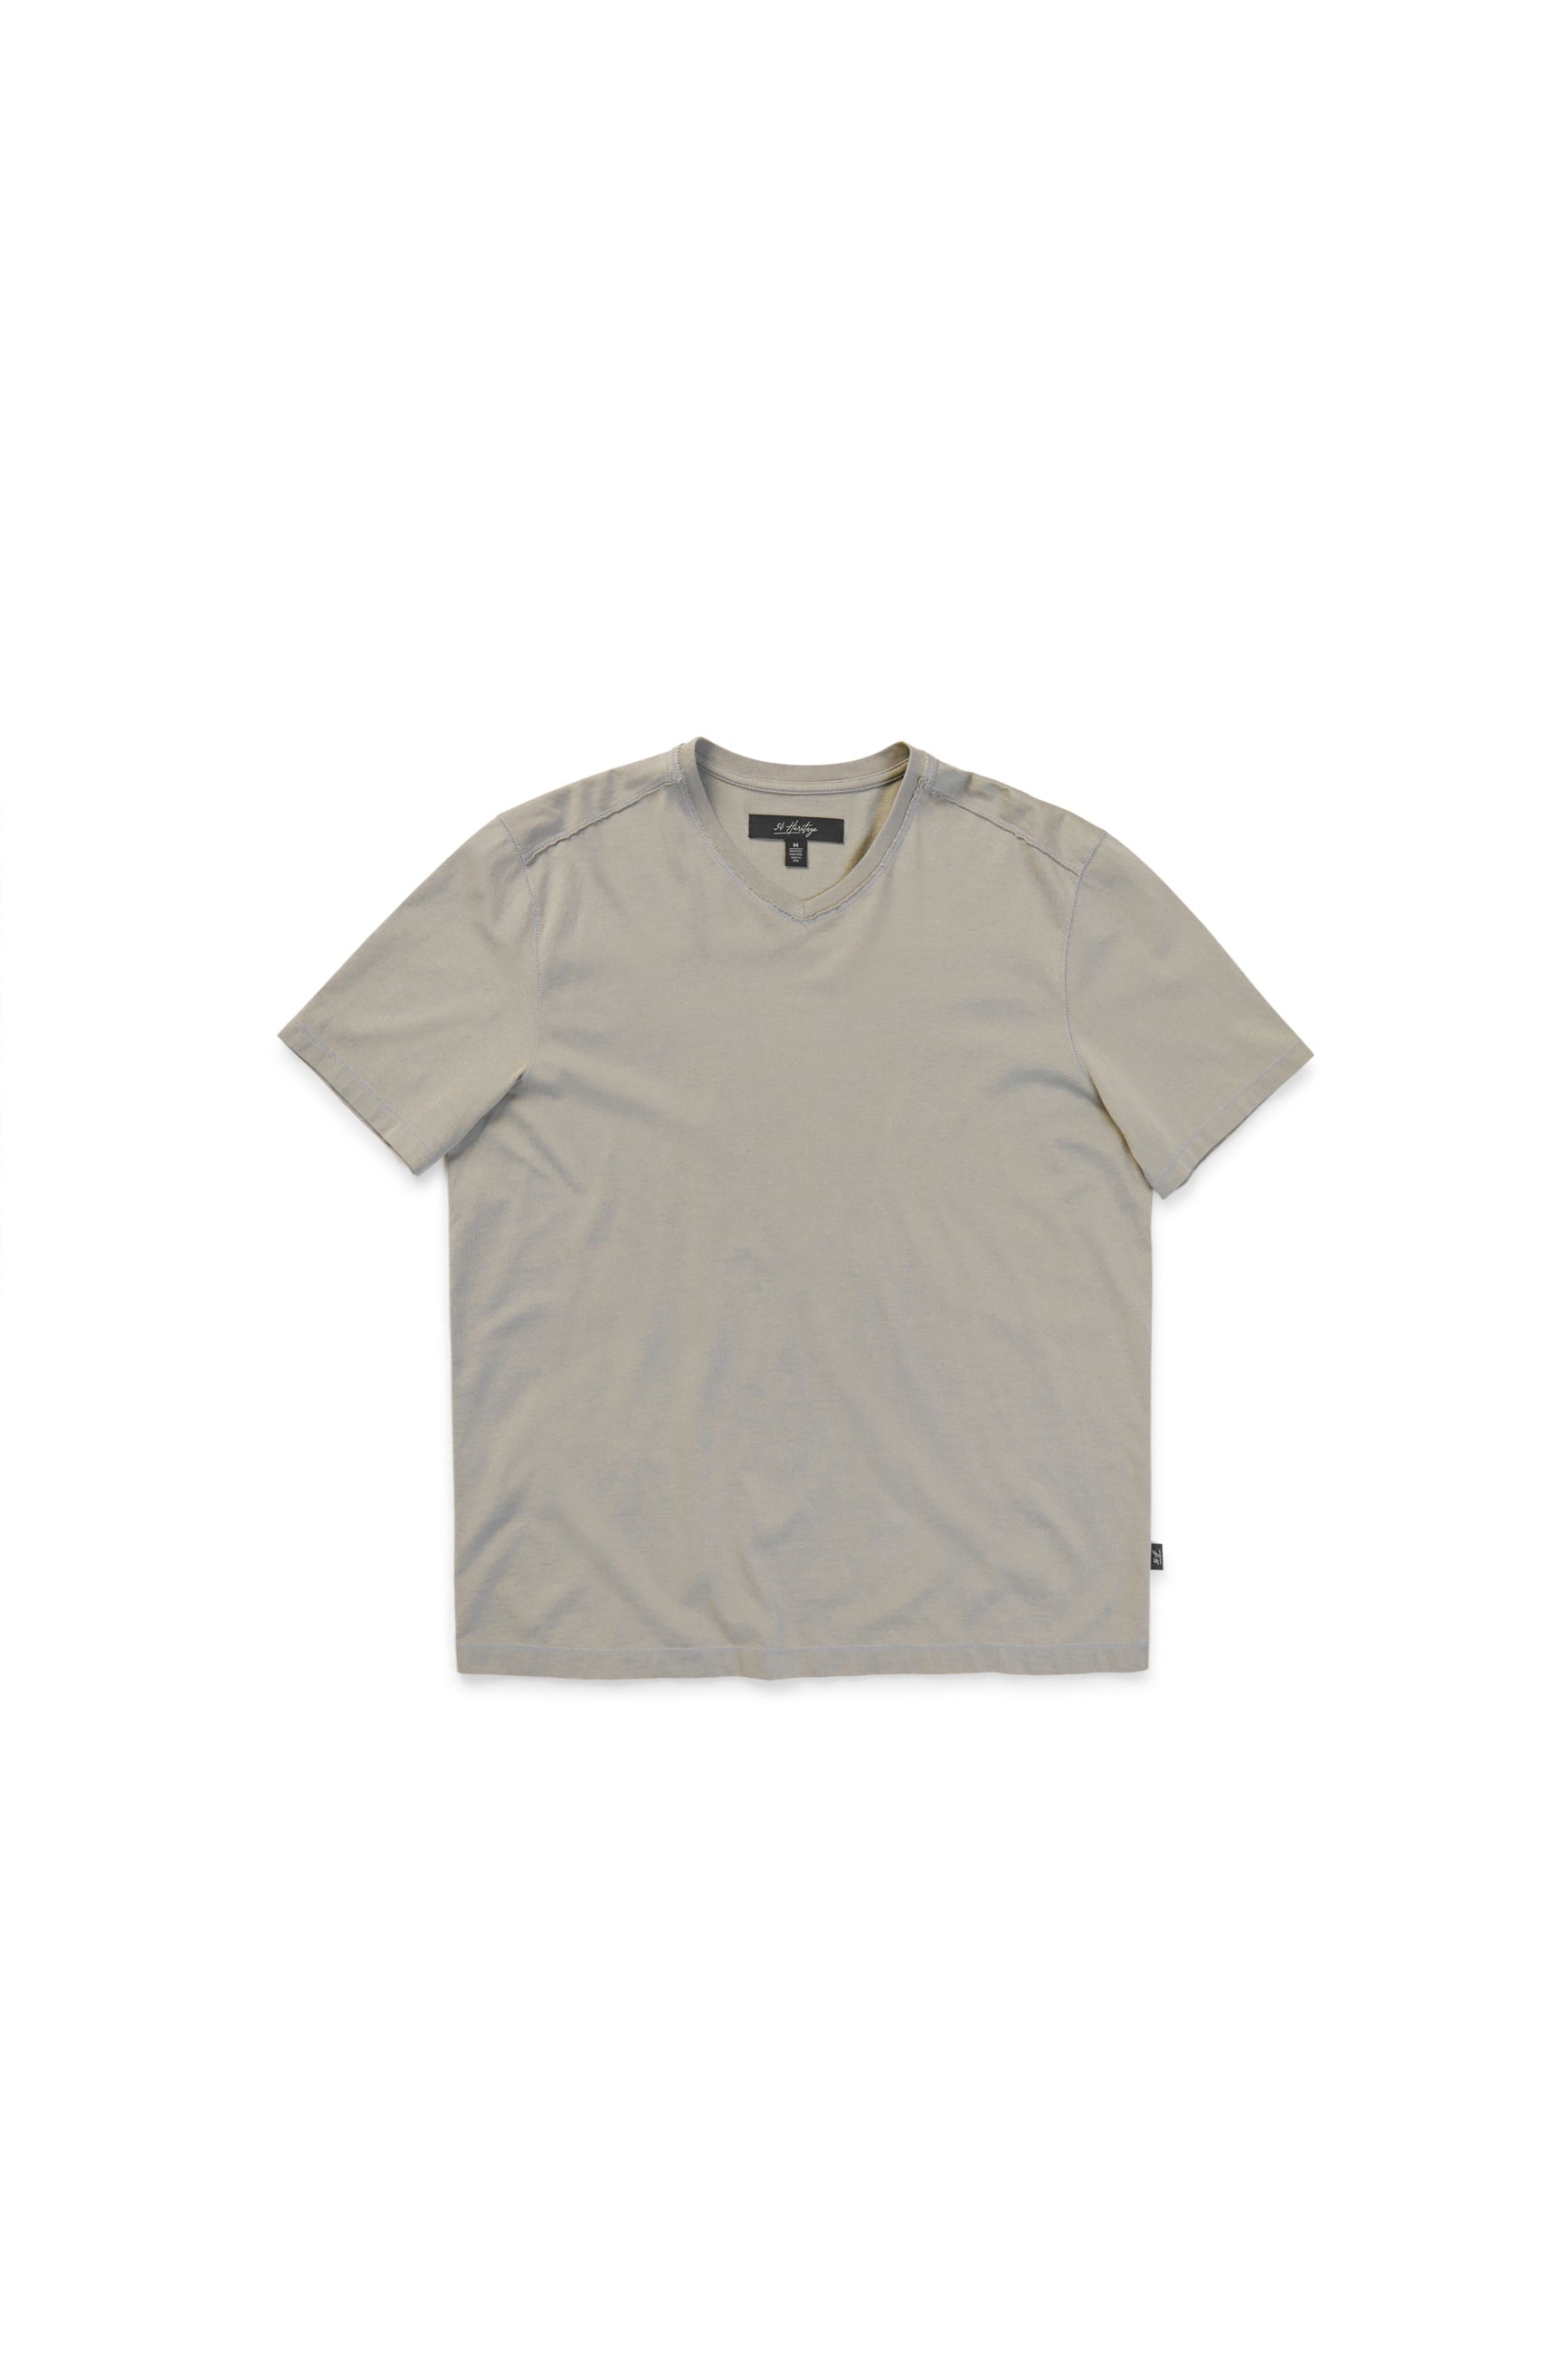 Deconstructed V-Neck T-Shirt in White Dove Image 8